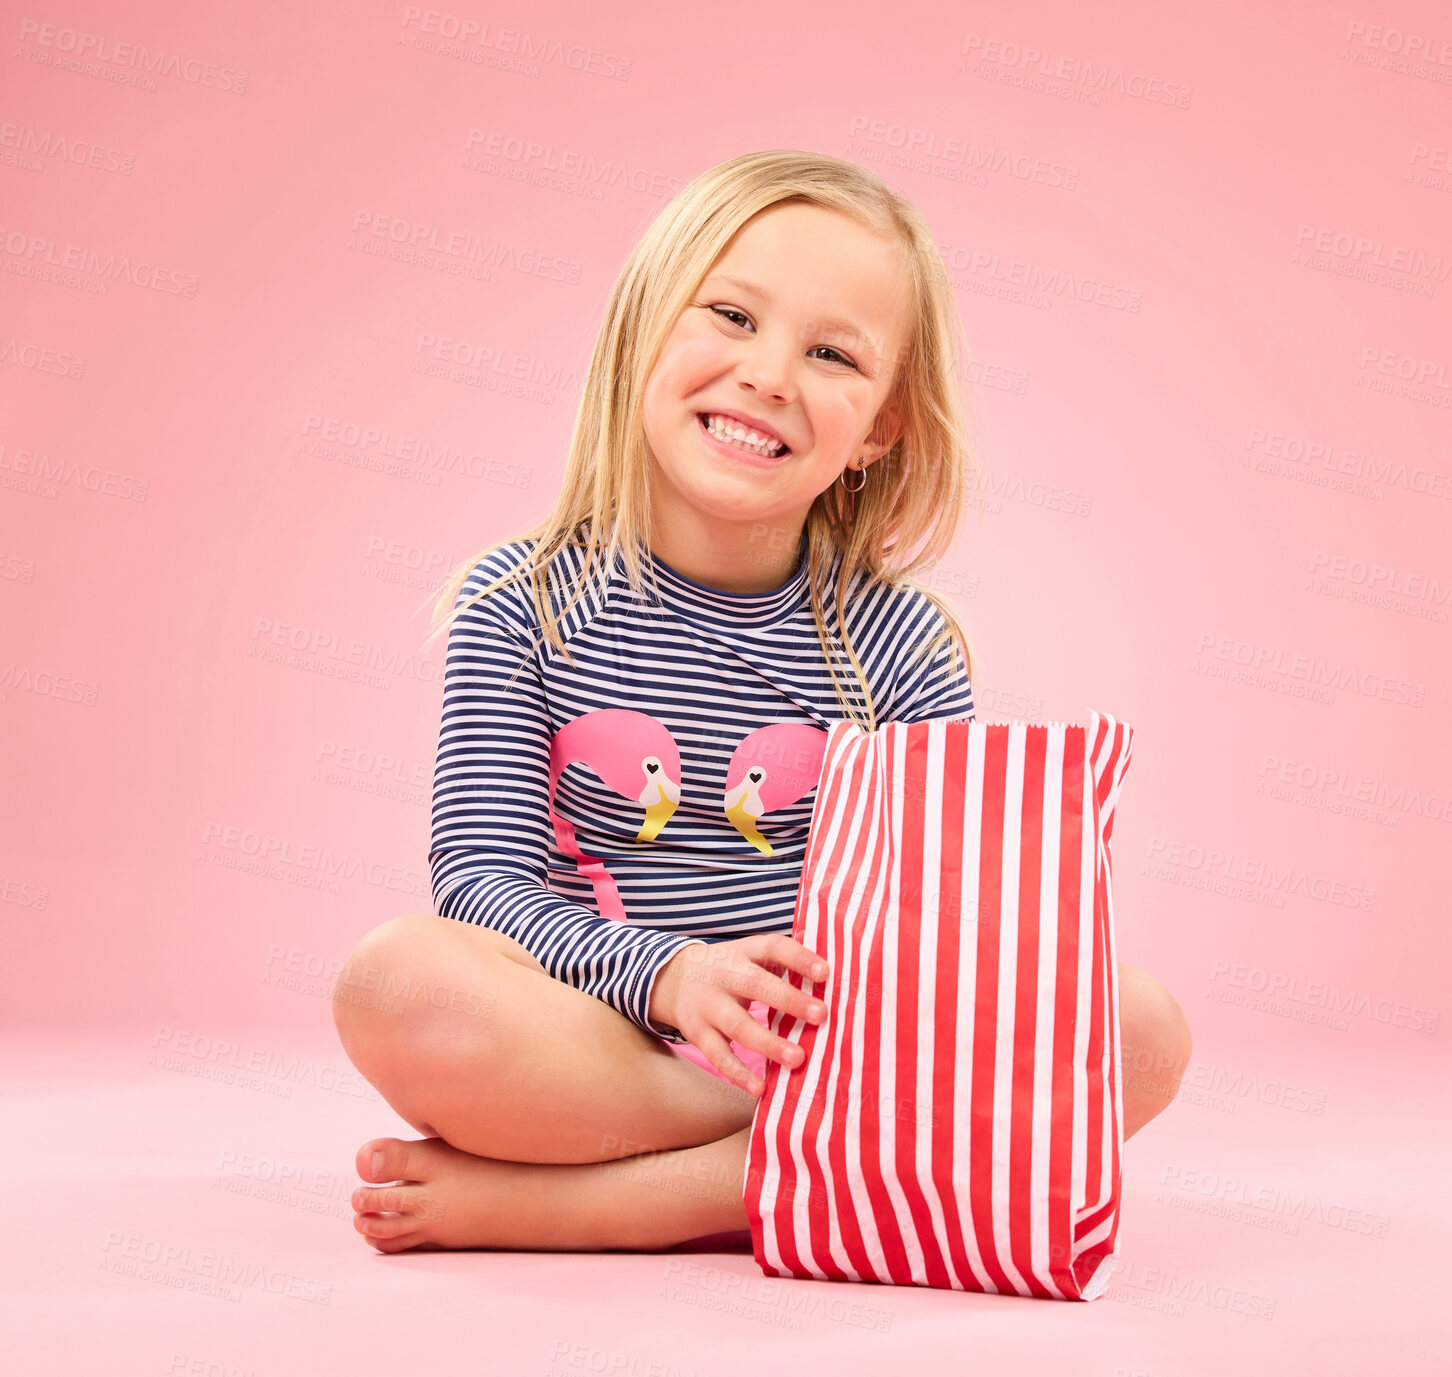 Buy stock photo Popcorn, food and happy girl portrait in a studio with pink background sitting with movie snacks. Snack, happiness and hungry child with a paper bag and chips eating and feeling relax with a smile